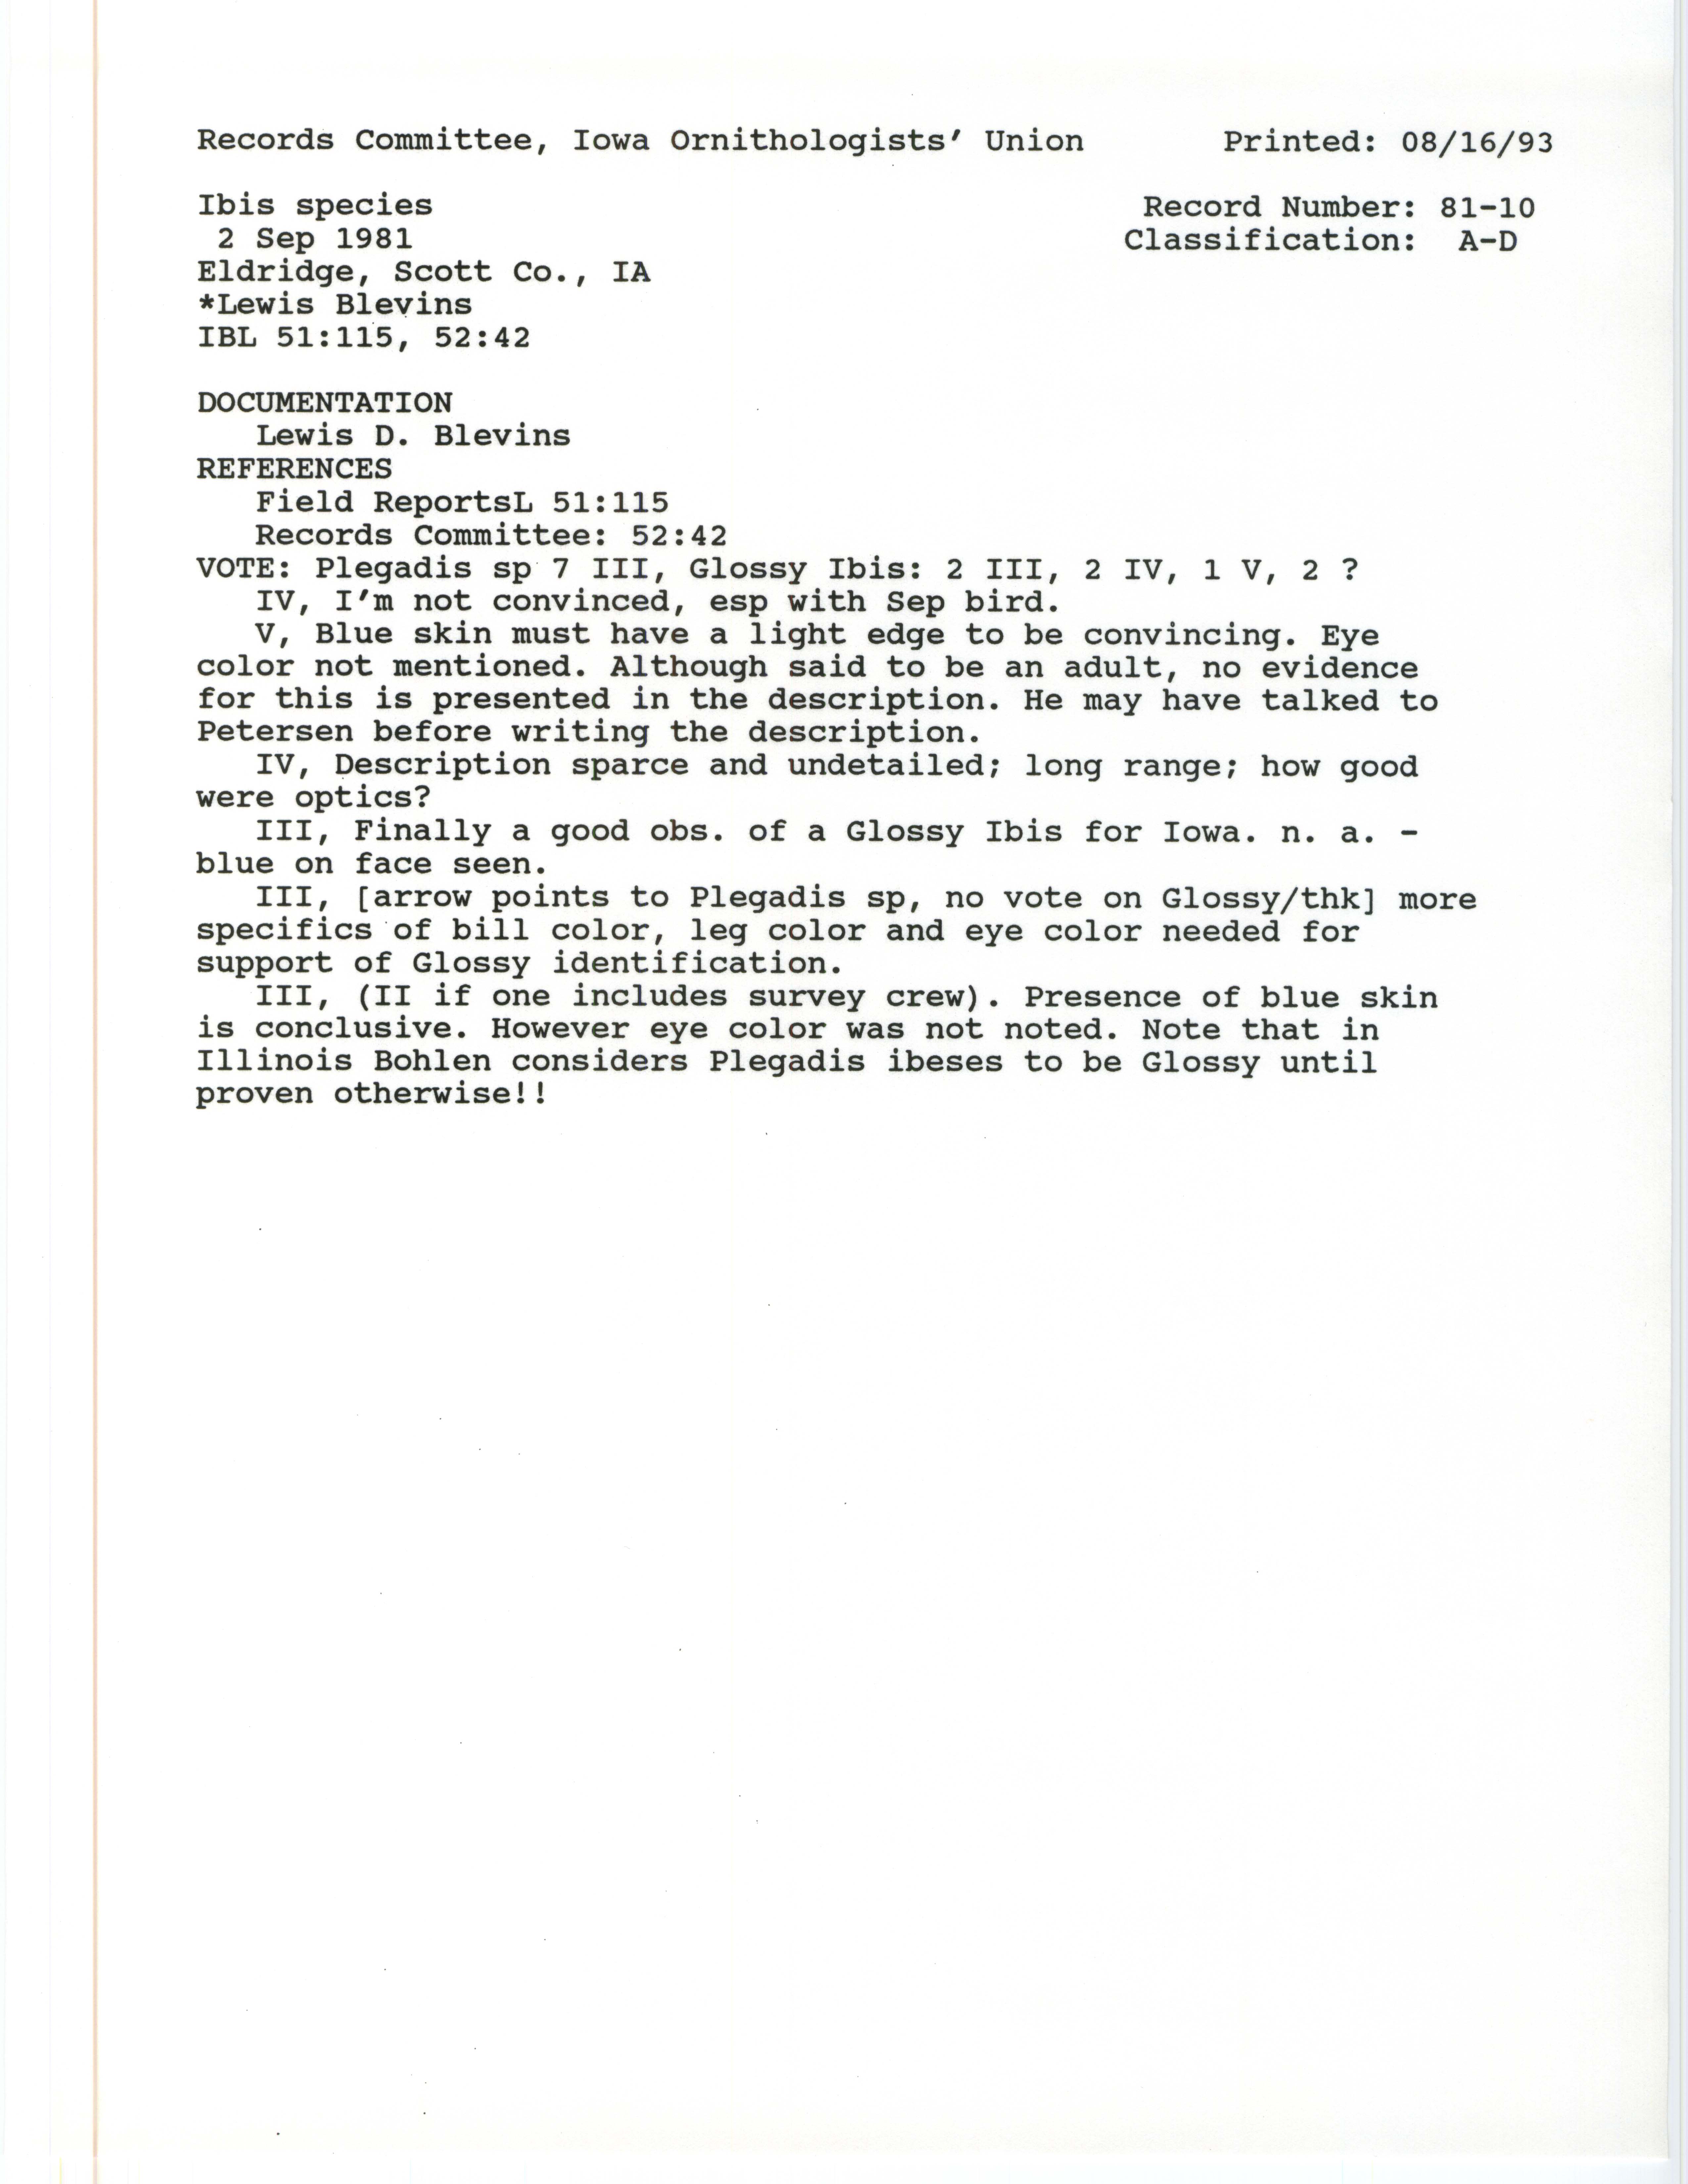 Records Committee review for rare bird sighting of Ibis species at Eldridge, 1981